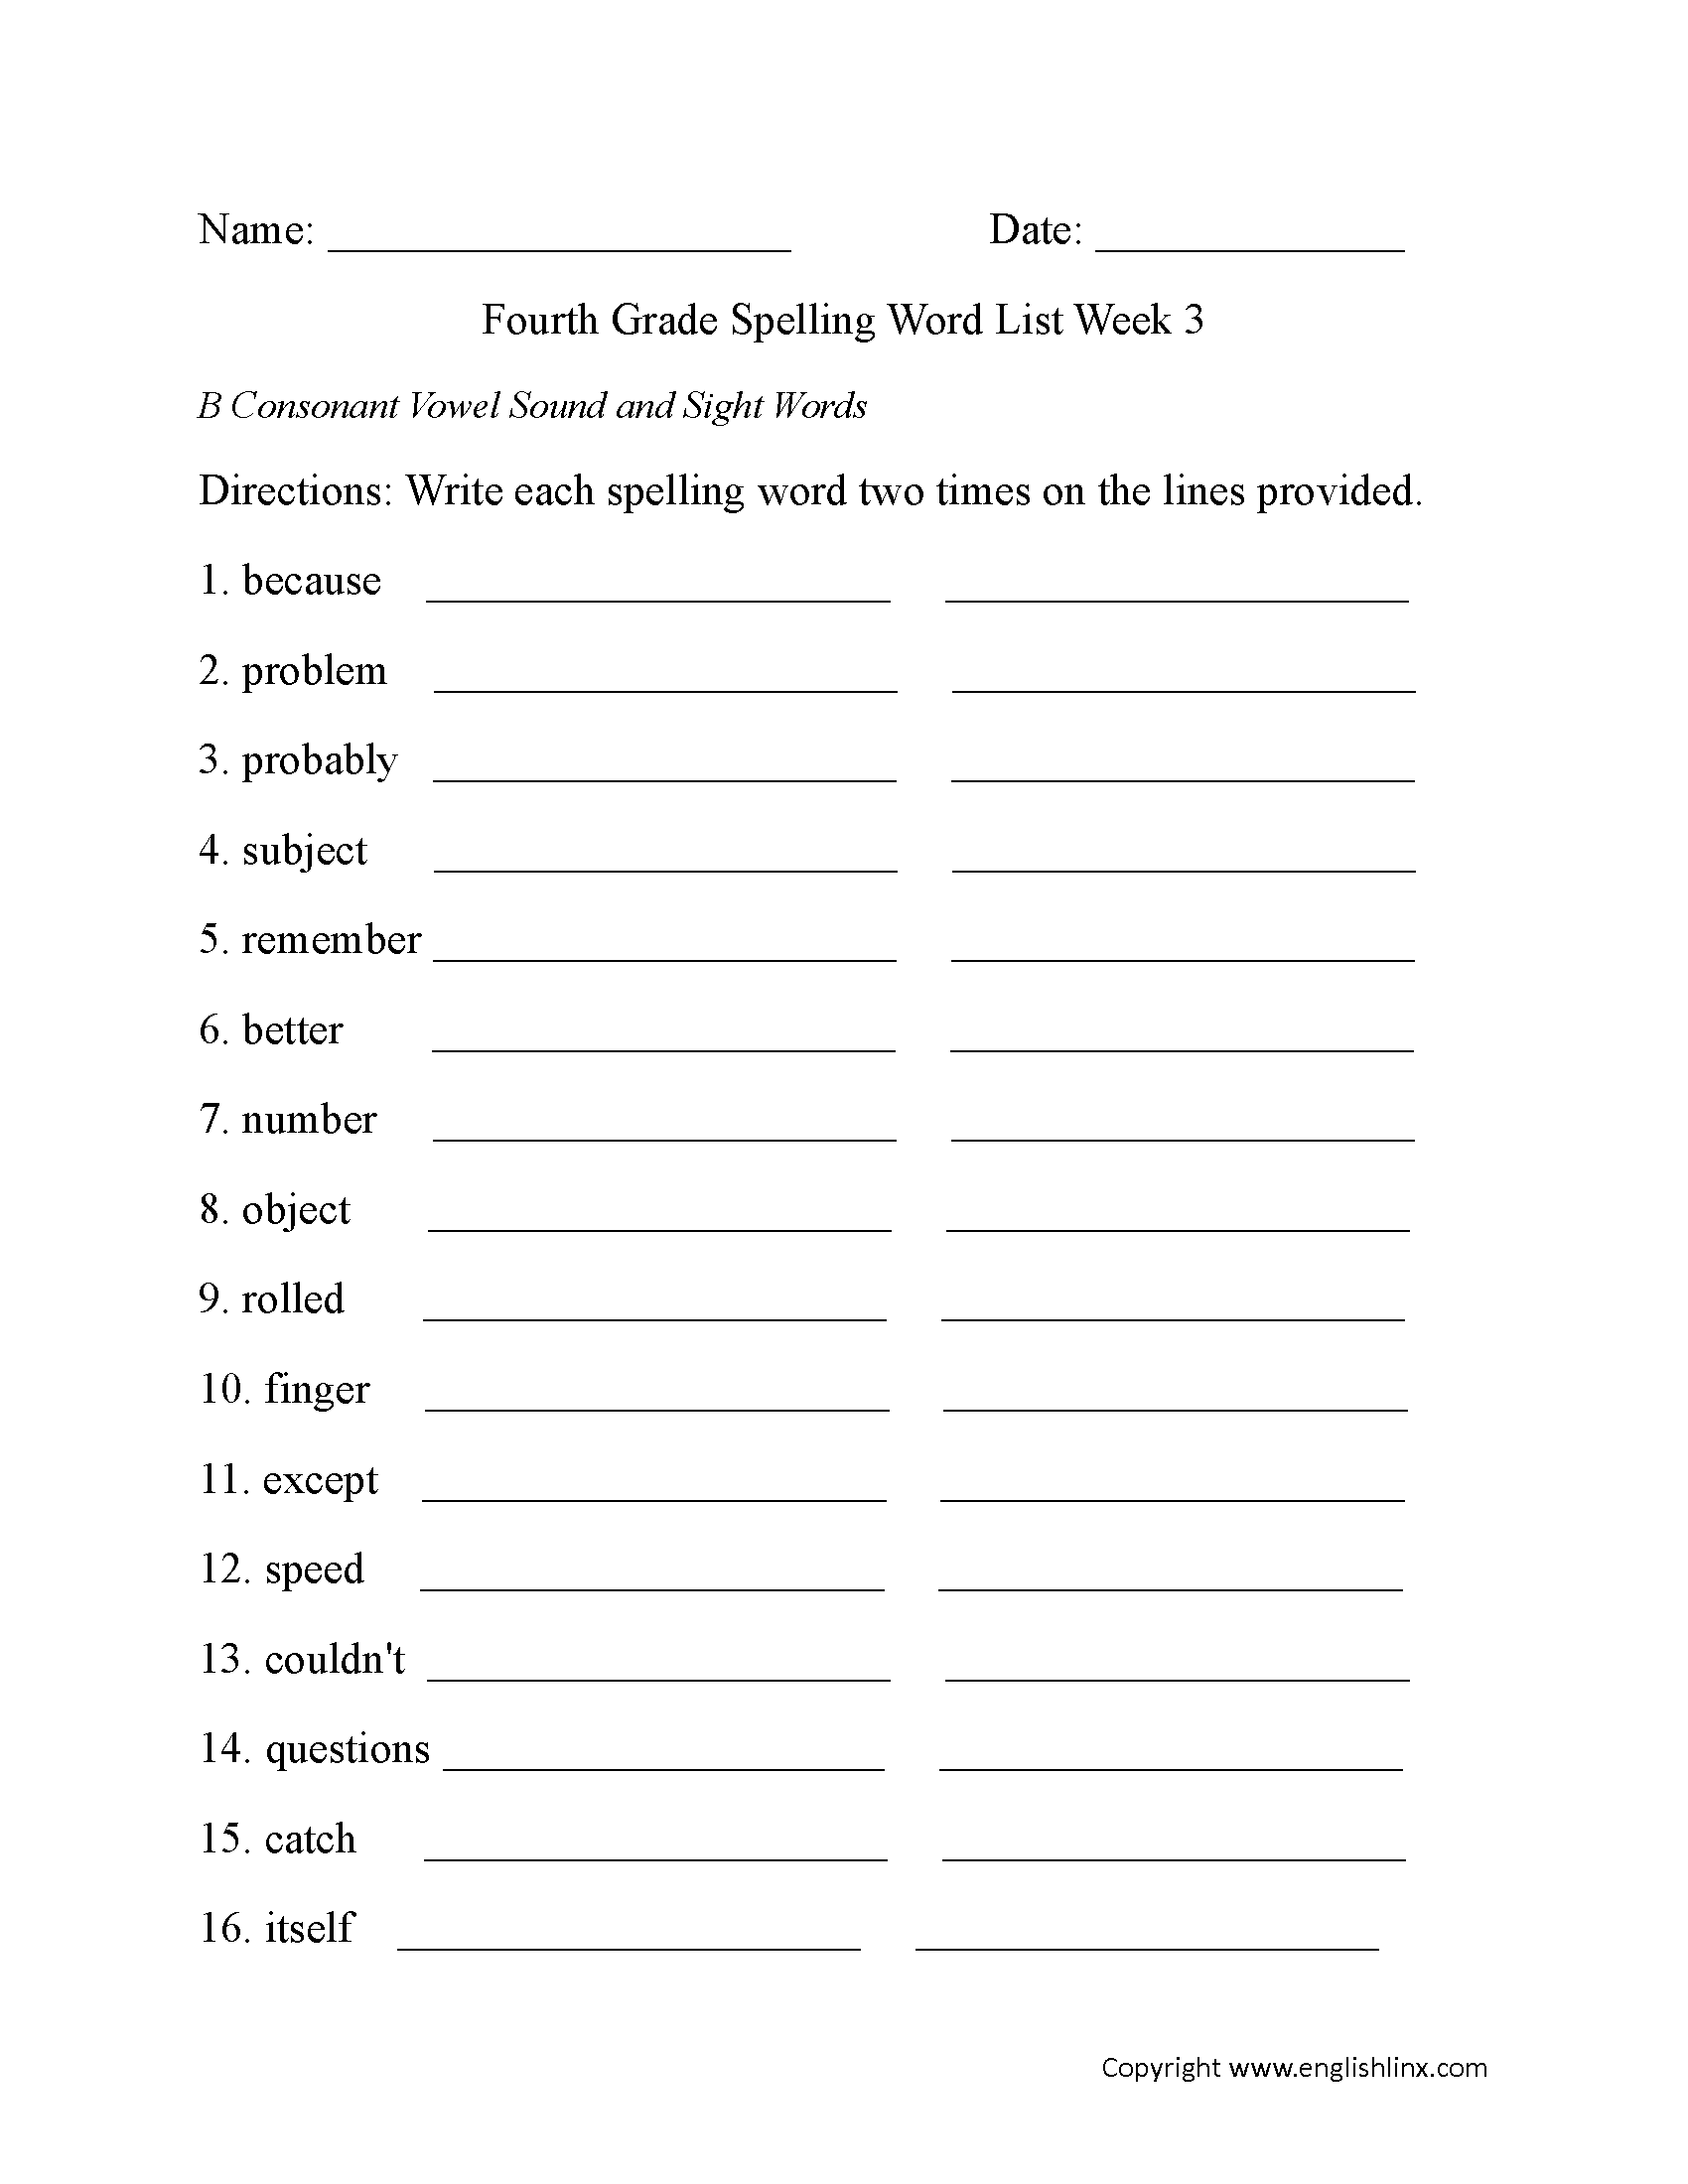 Week 3 B Consonant and Sight Words Fourth Grade Spelling Words Worksheets